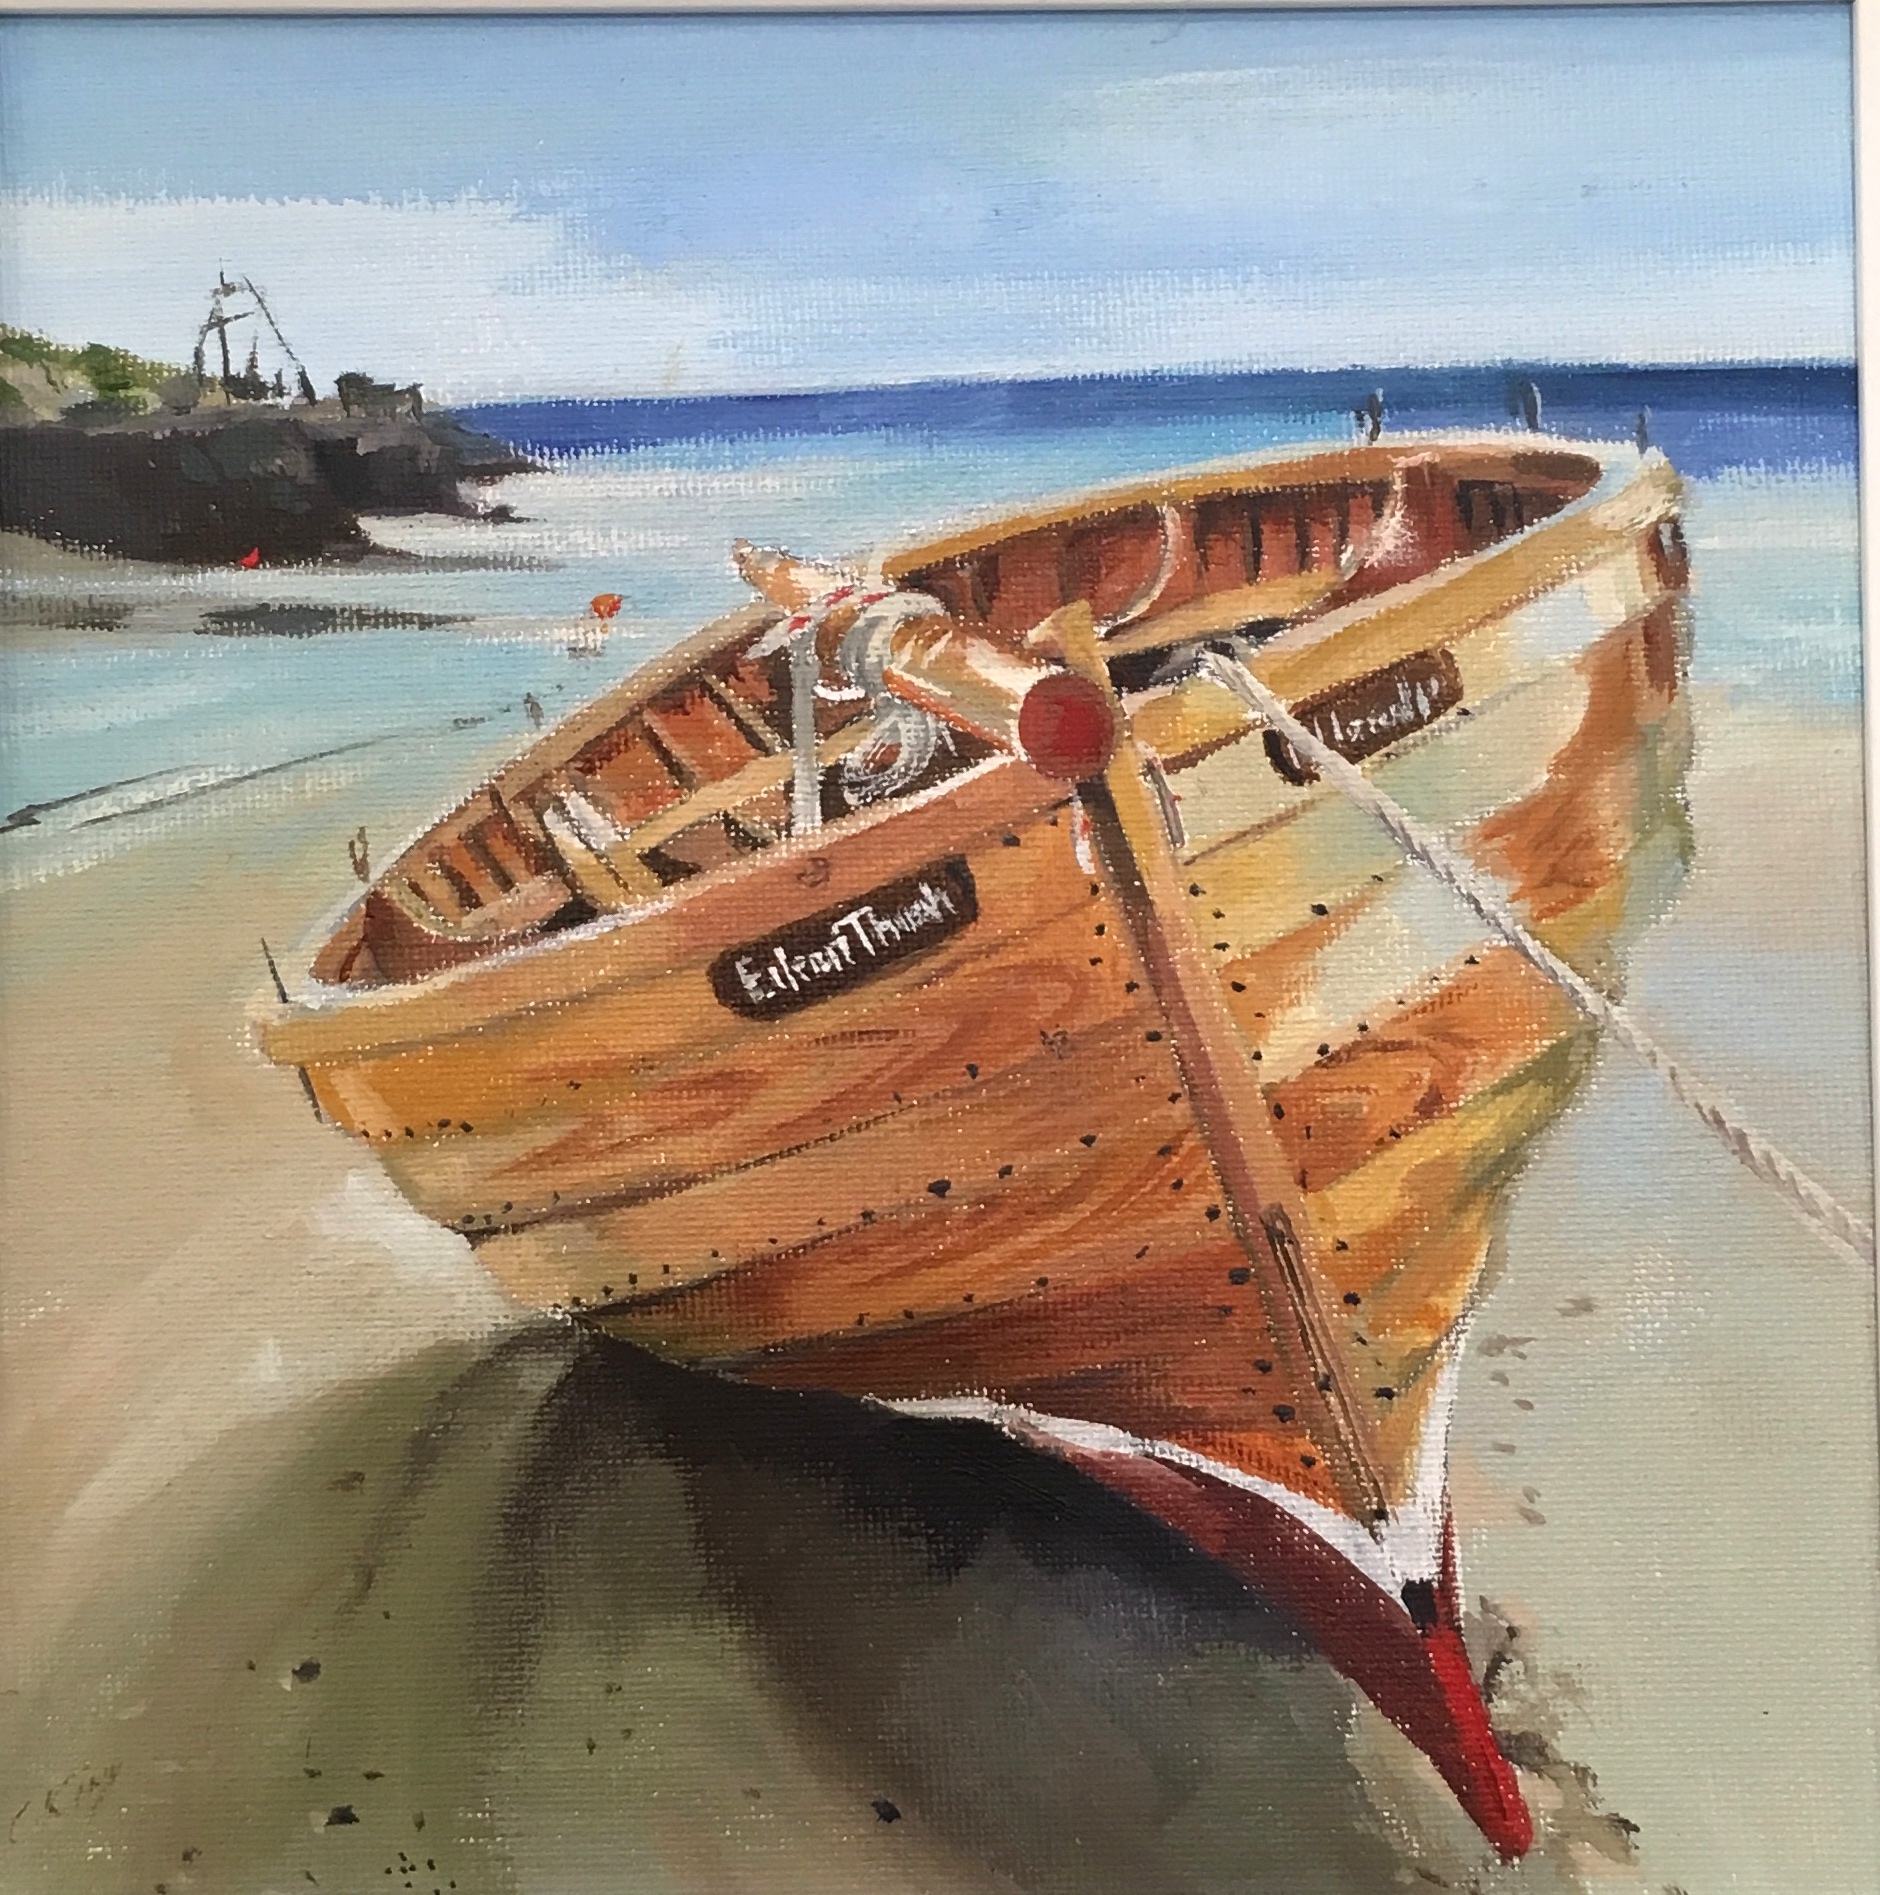 'Waiting for Summer' by artist Catherine King